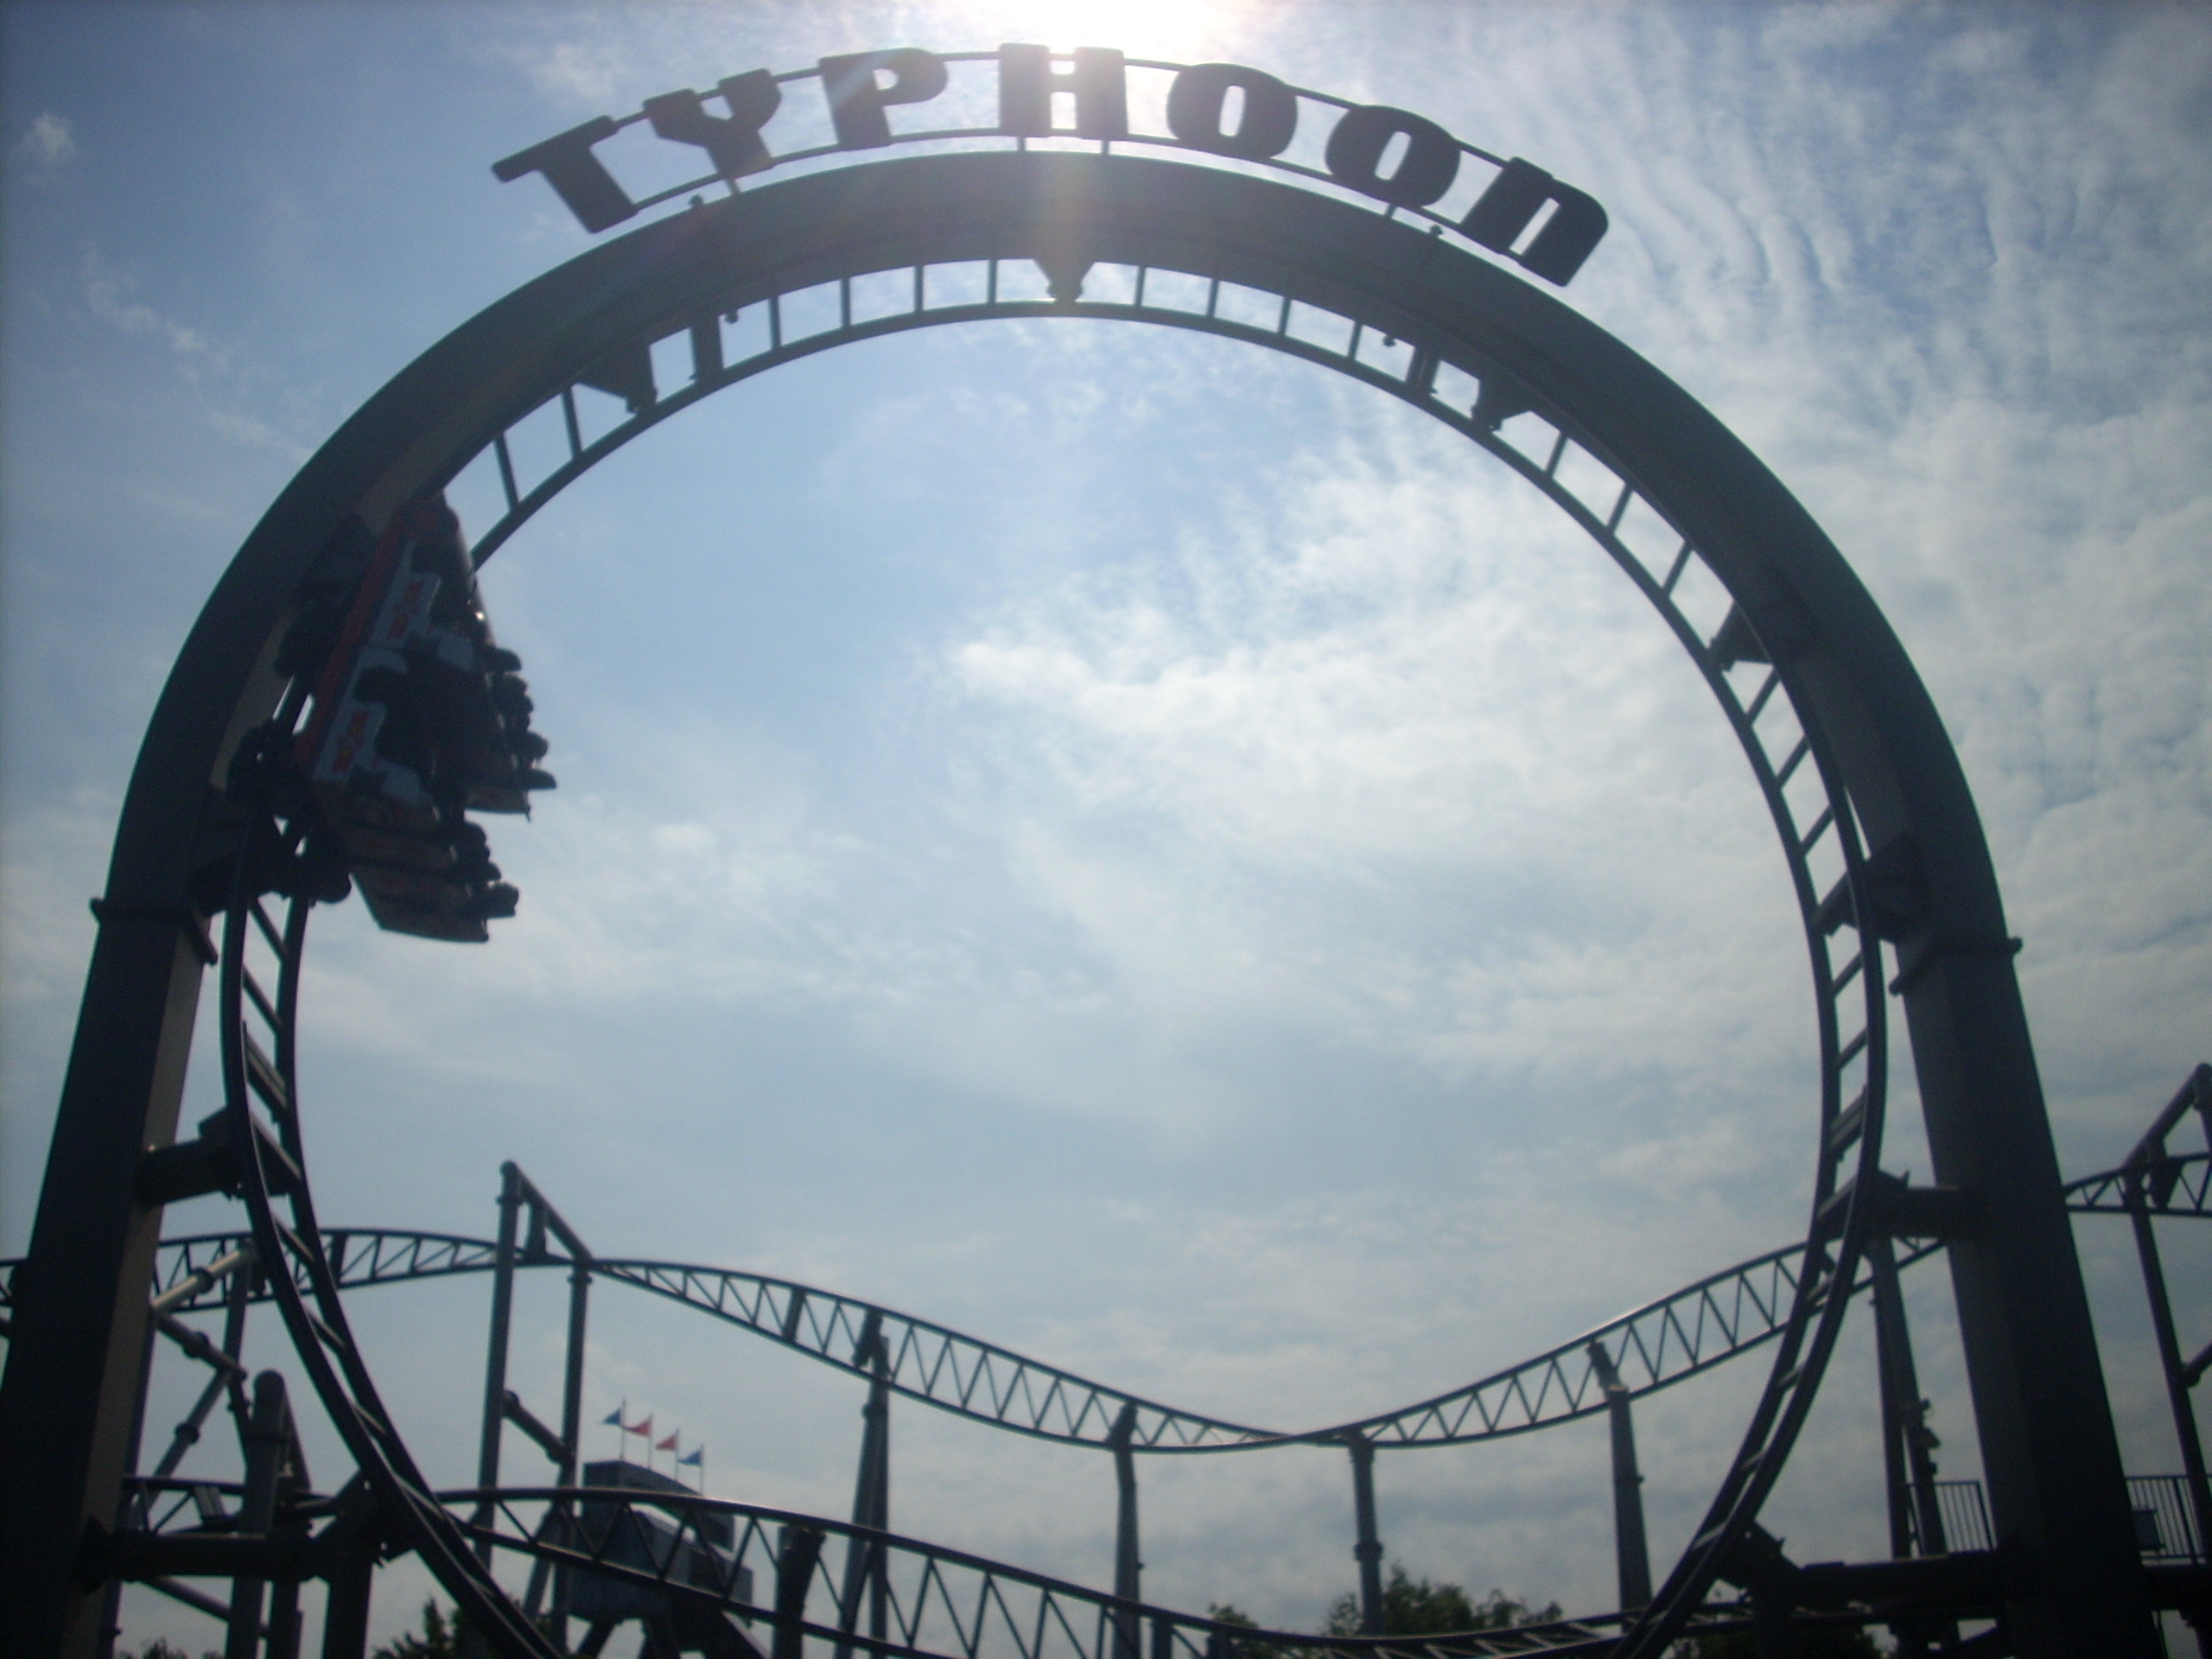 the_typhoon___bobbejaanland_by_theonlypj-d34x47a.png